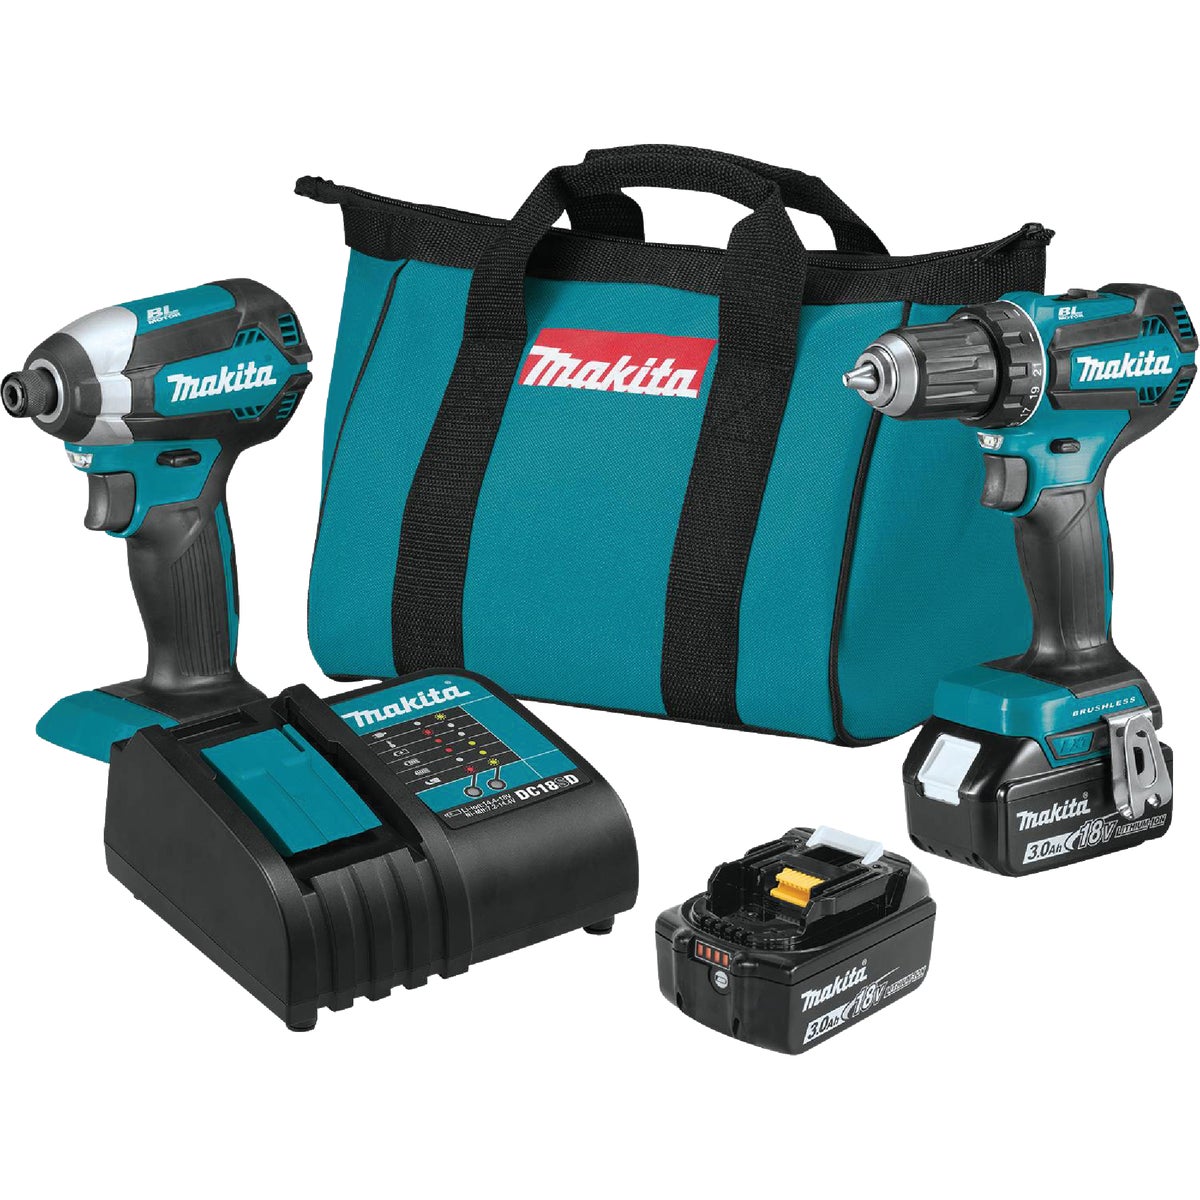 Makita 2-Tool 18 Volt LXT Lithium-Ion Brushless Compact Drill/Driver & Impact Driver Cordless Tool Combo Kit